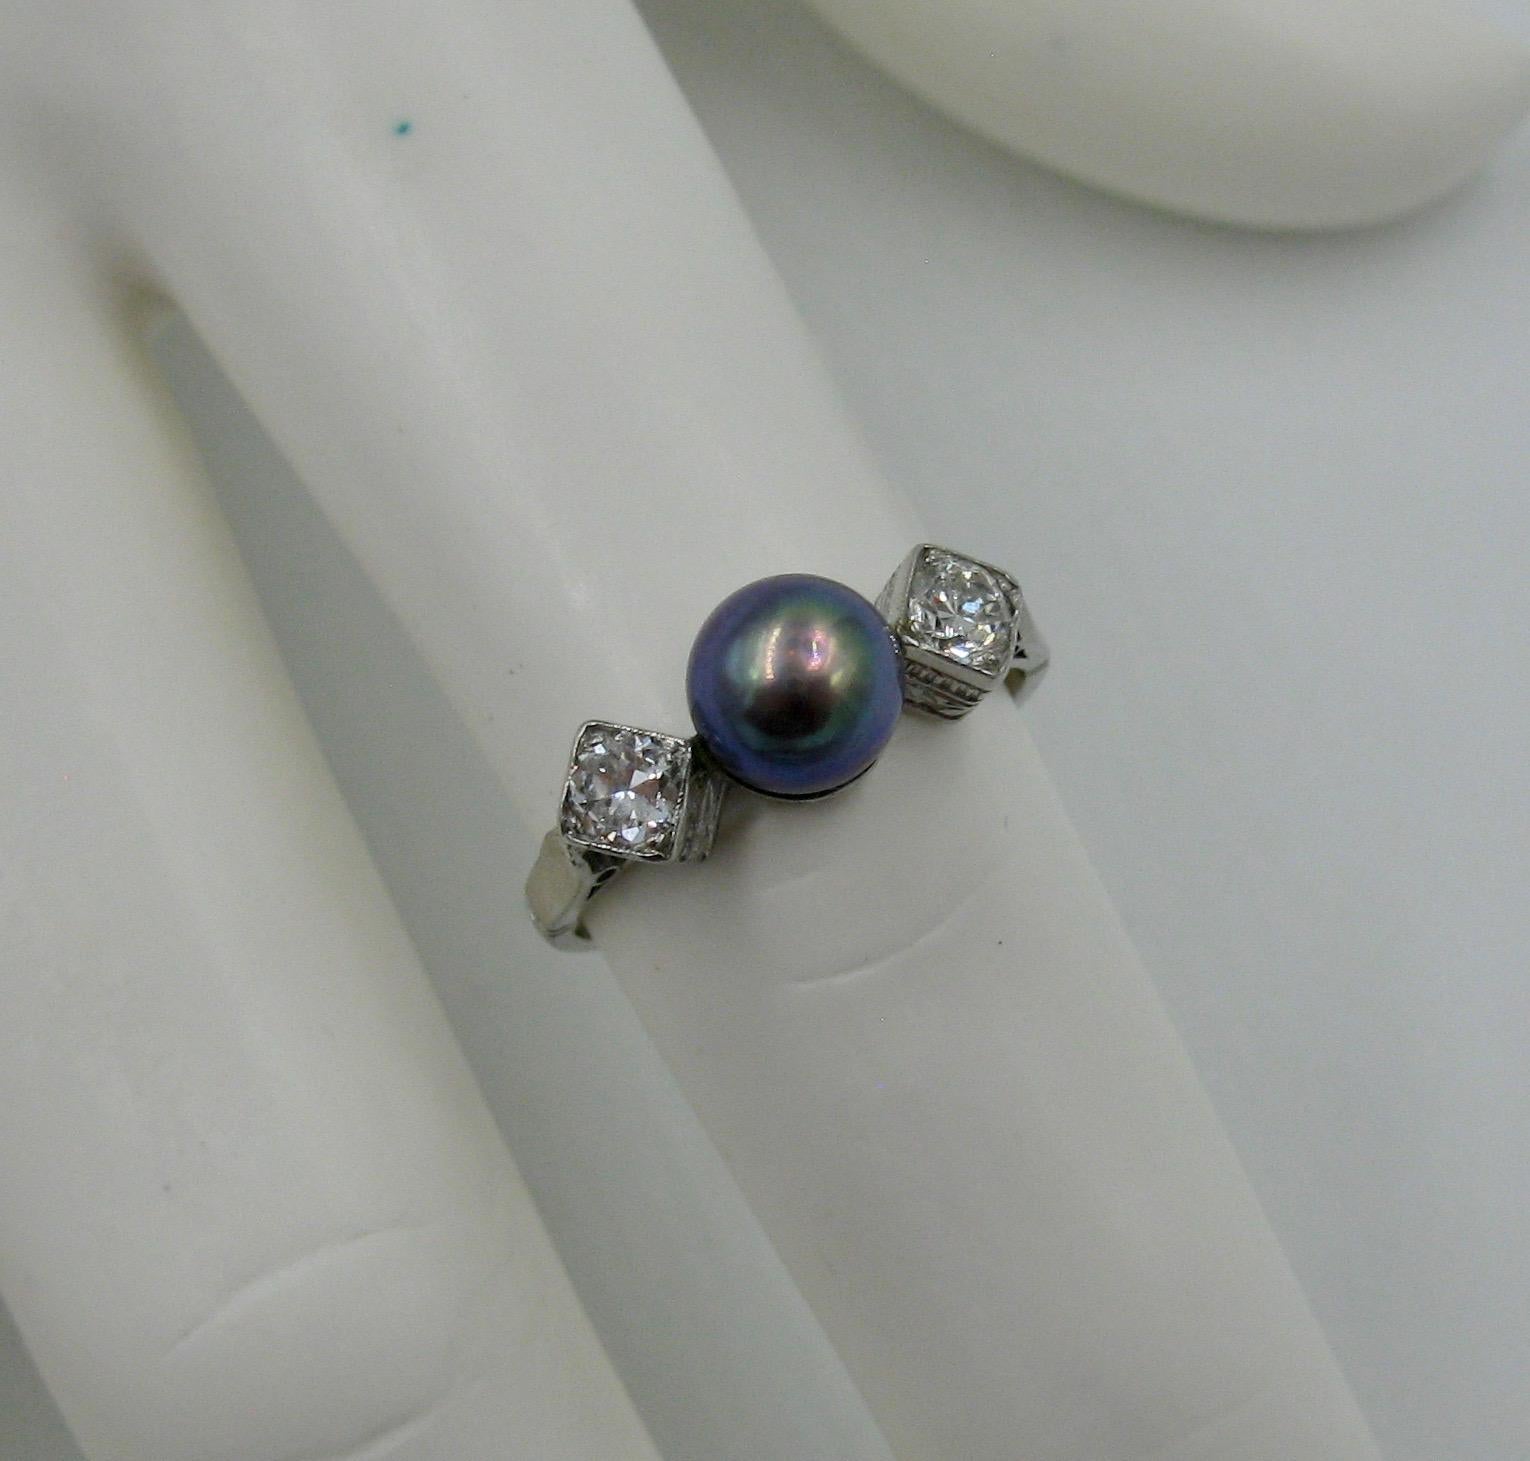 This is a stunning trilogy ring set with a central Black Pearl and two gorgeous sparkling round brilliant cut Diamonds in Platinum.  The dramatic combination of the black pearl and the white diamonds and platinum is gorgeous.  The pearl is 6 mm in